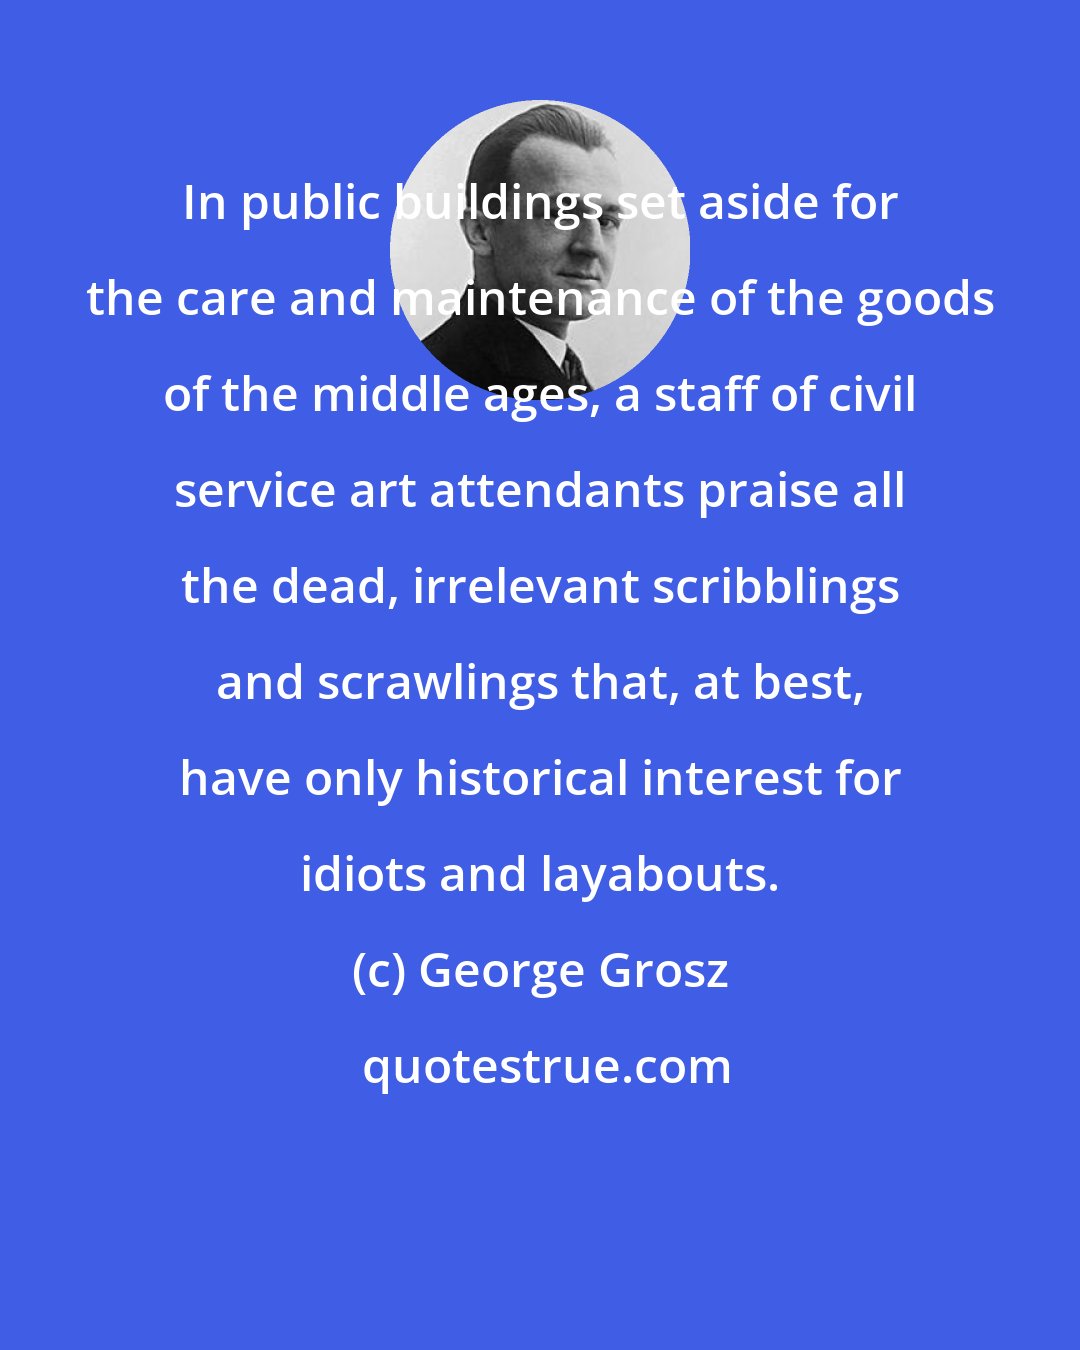 George Grosz: In public buildings set aside for the care and maintenance of the goods of the middle ages, a staff of civil service art attendants praise all the dead, irrelevant scribblings and scrawlings that, at best, have only historical interest for idiots and layabouts.